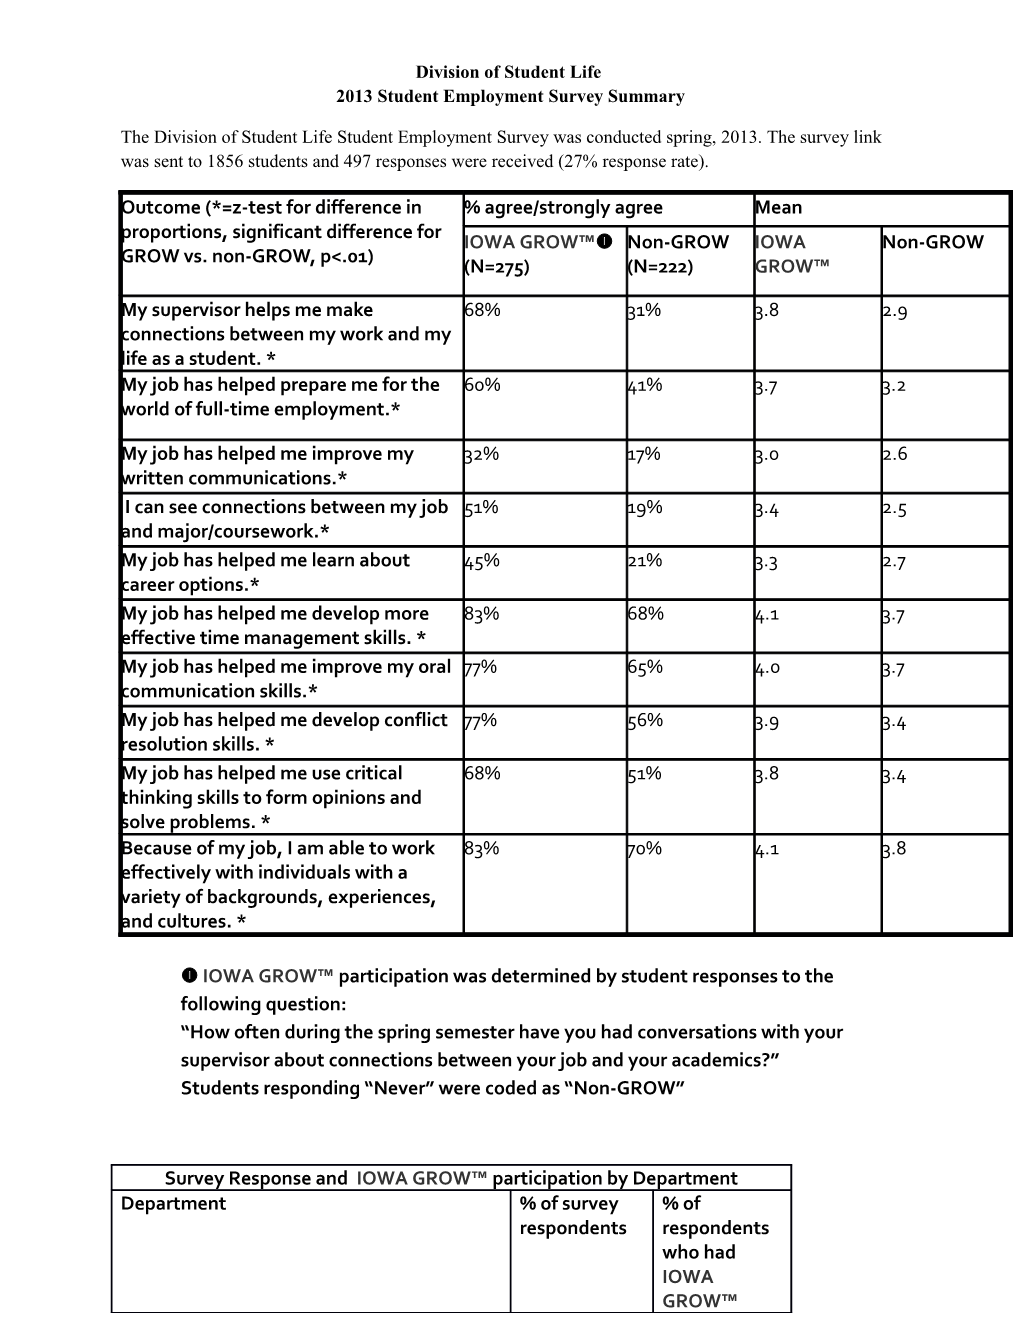 Division of Student Life 2013 Student Employment Survey Summary